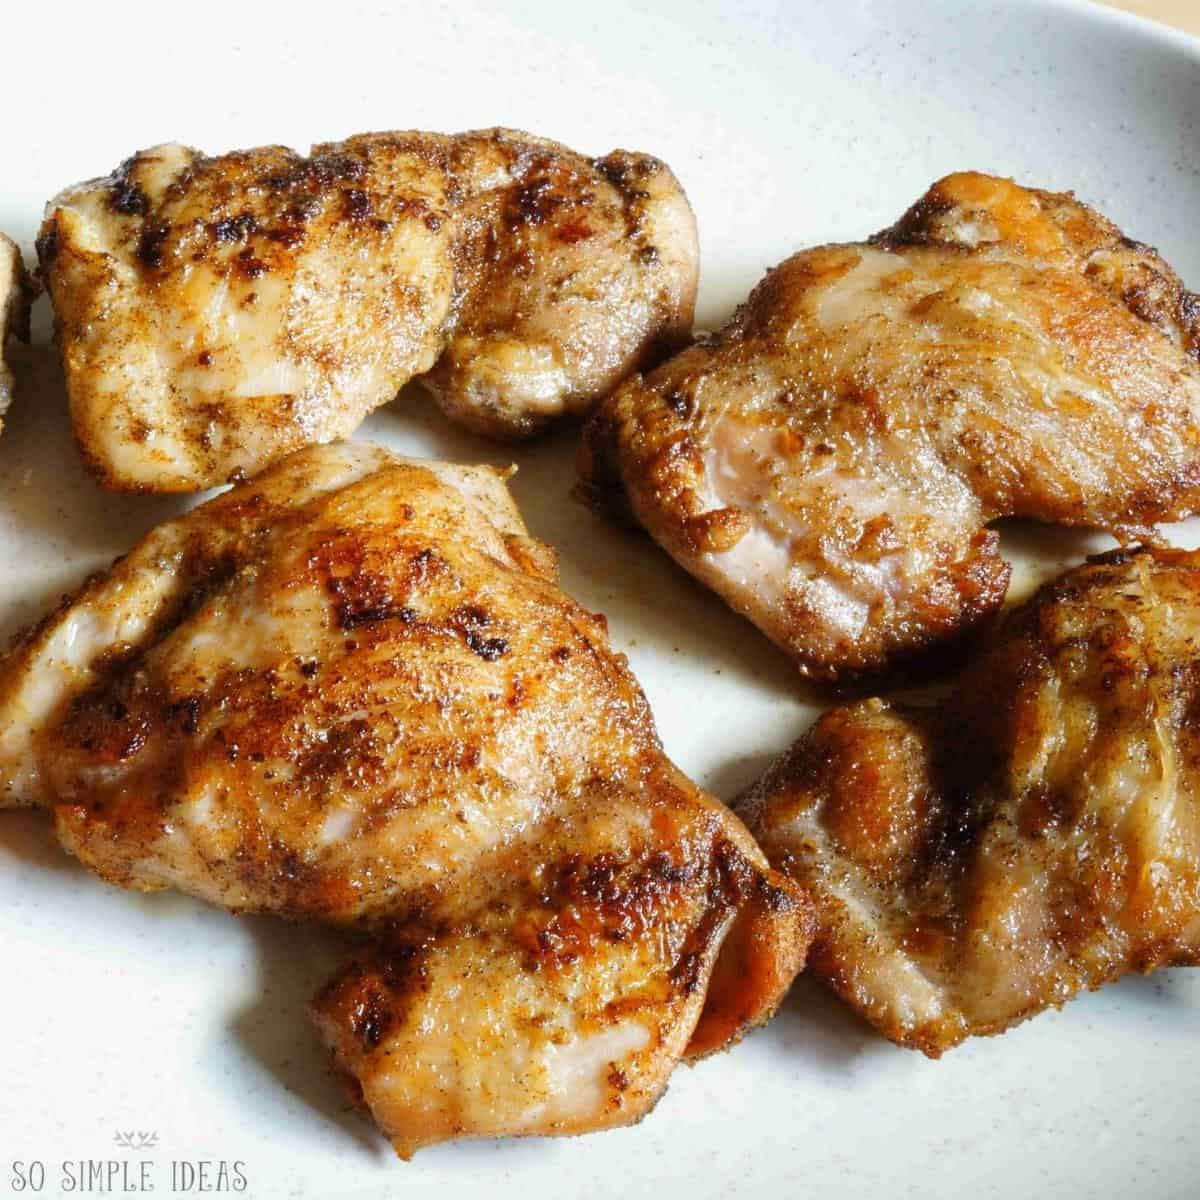 pan fried boneless chicken thighs on white plate.